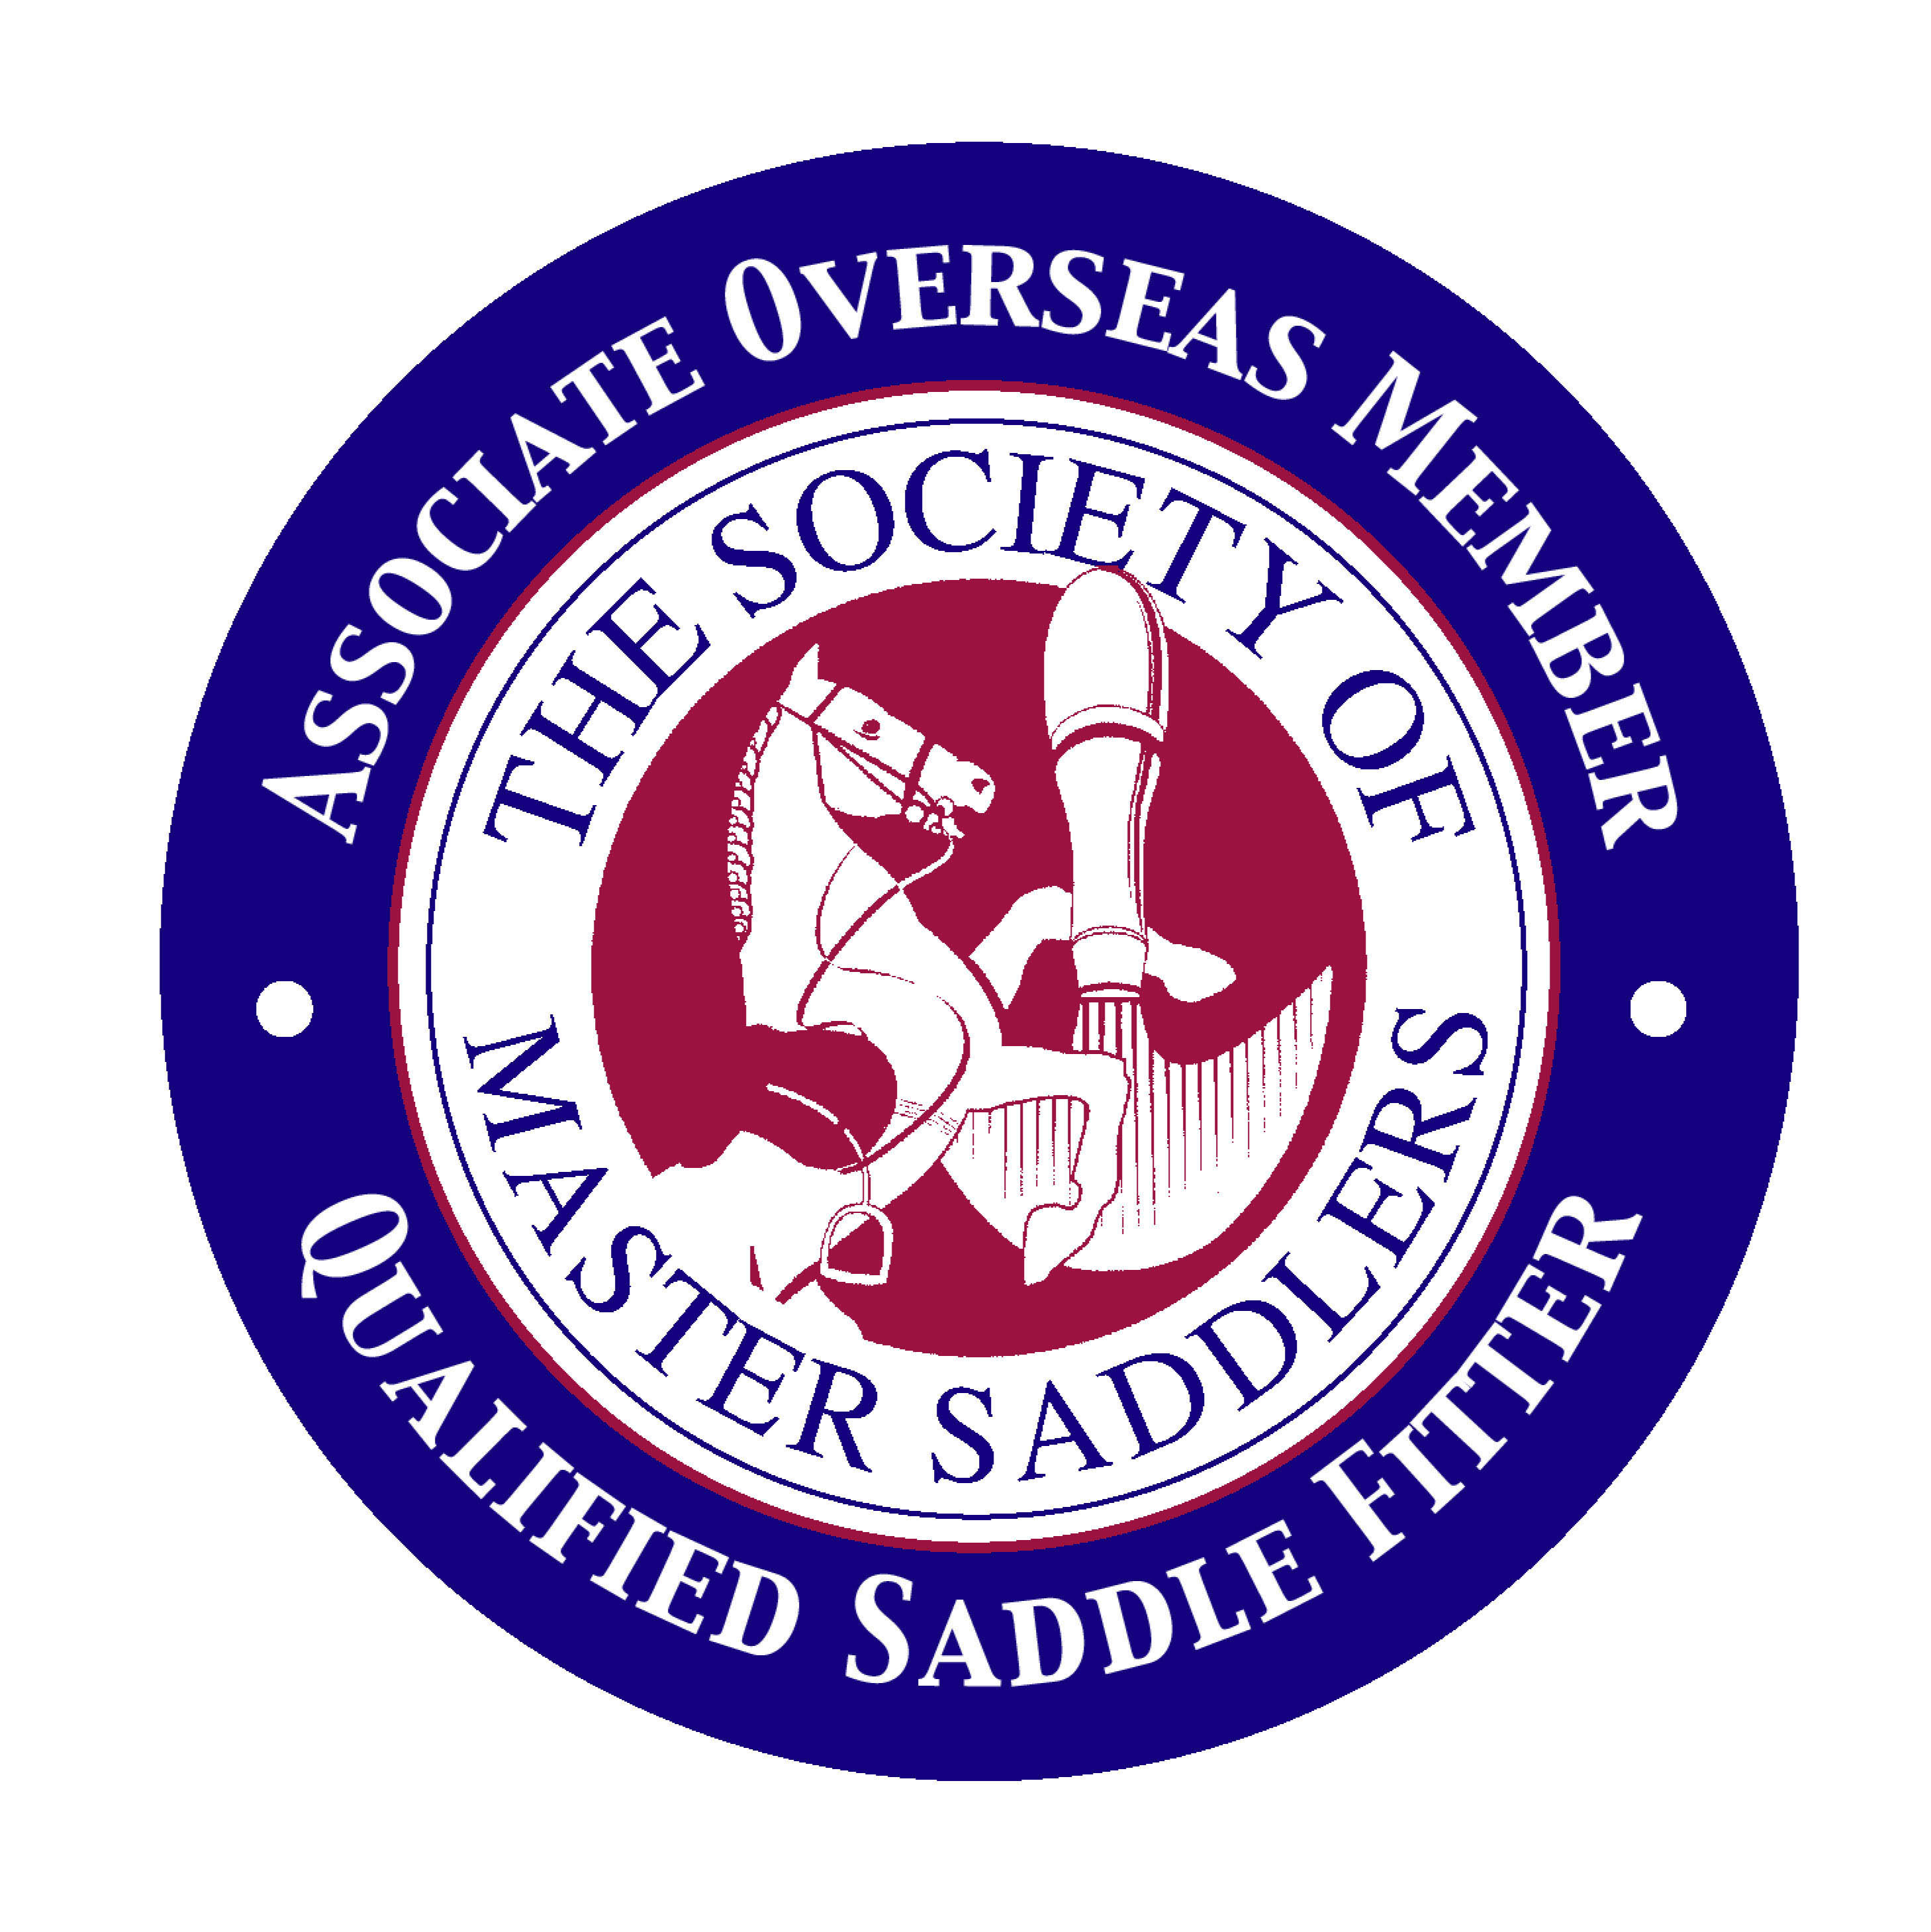 Associate Overseas Member Qualified Saddle Fitter